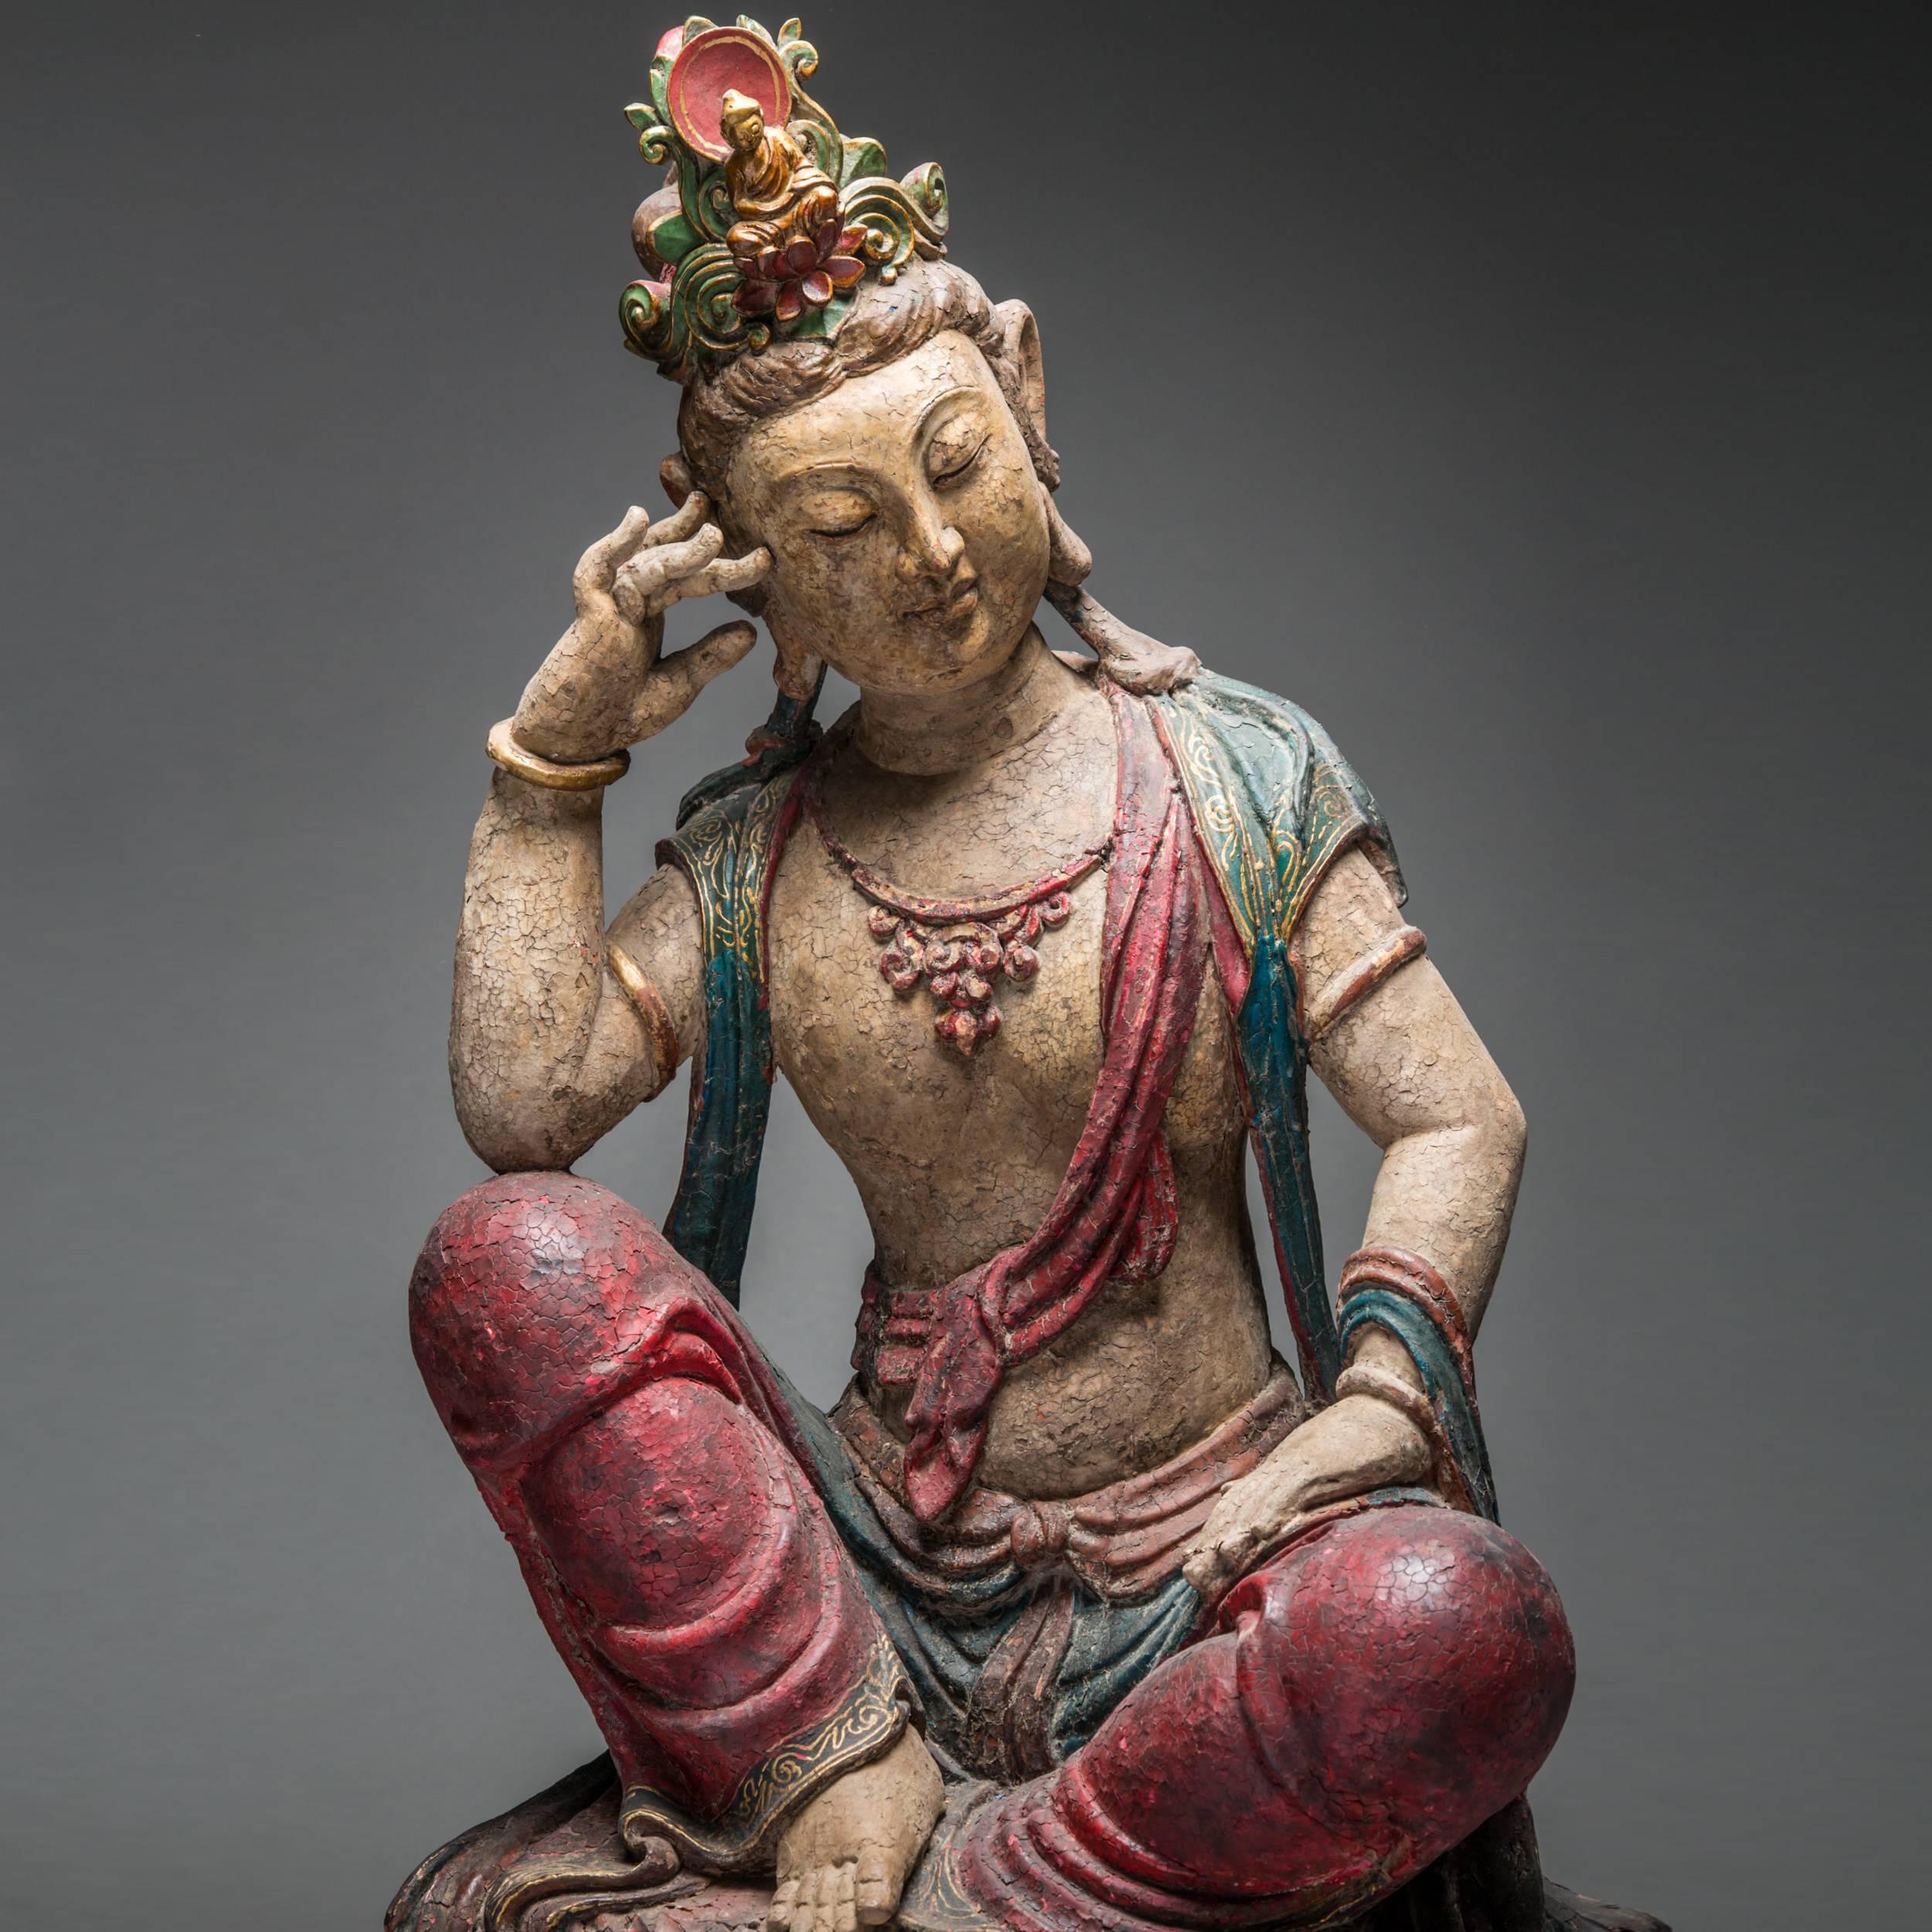 Representation of the Bodhisattva of Mercy, known as Avalokiteshvara, or Guanyin in Chinese. Bodhisattvas were originally depicted as the Buddha’s attendants but increasingly came to be venerated in their own right. Avalokiteshvara is identifiable